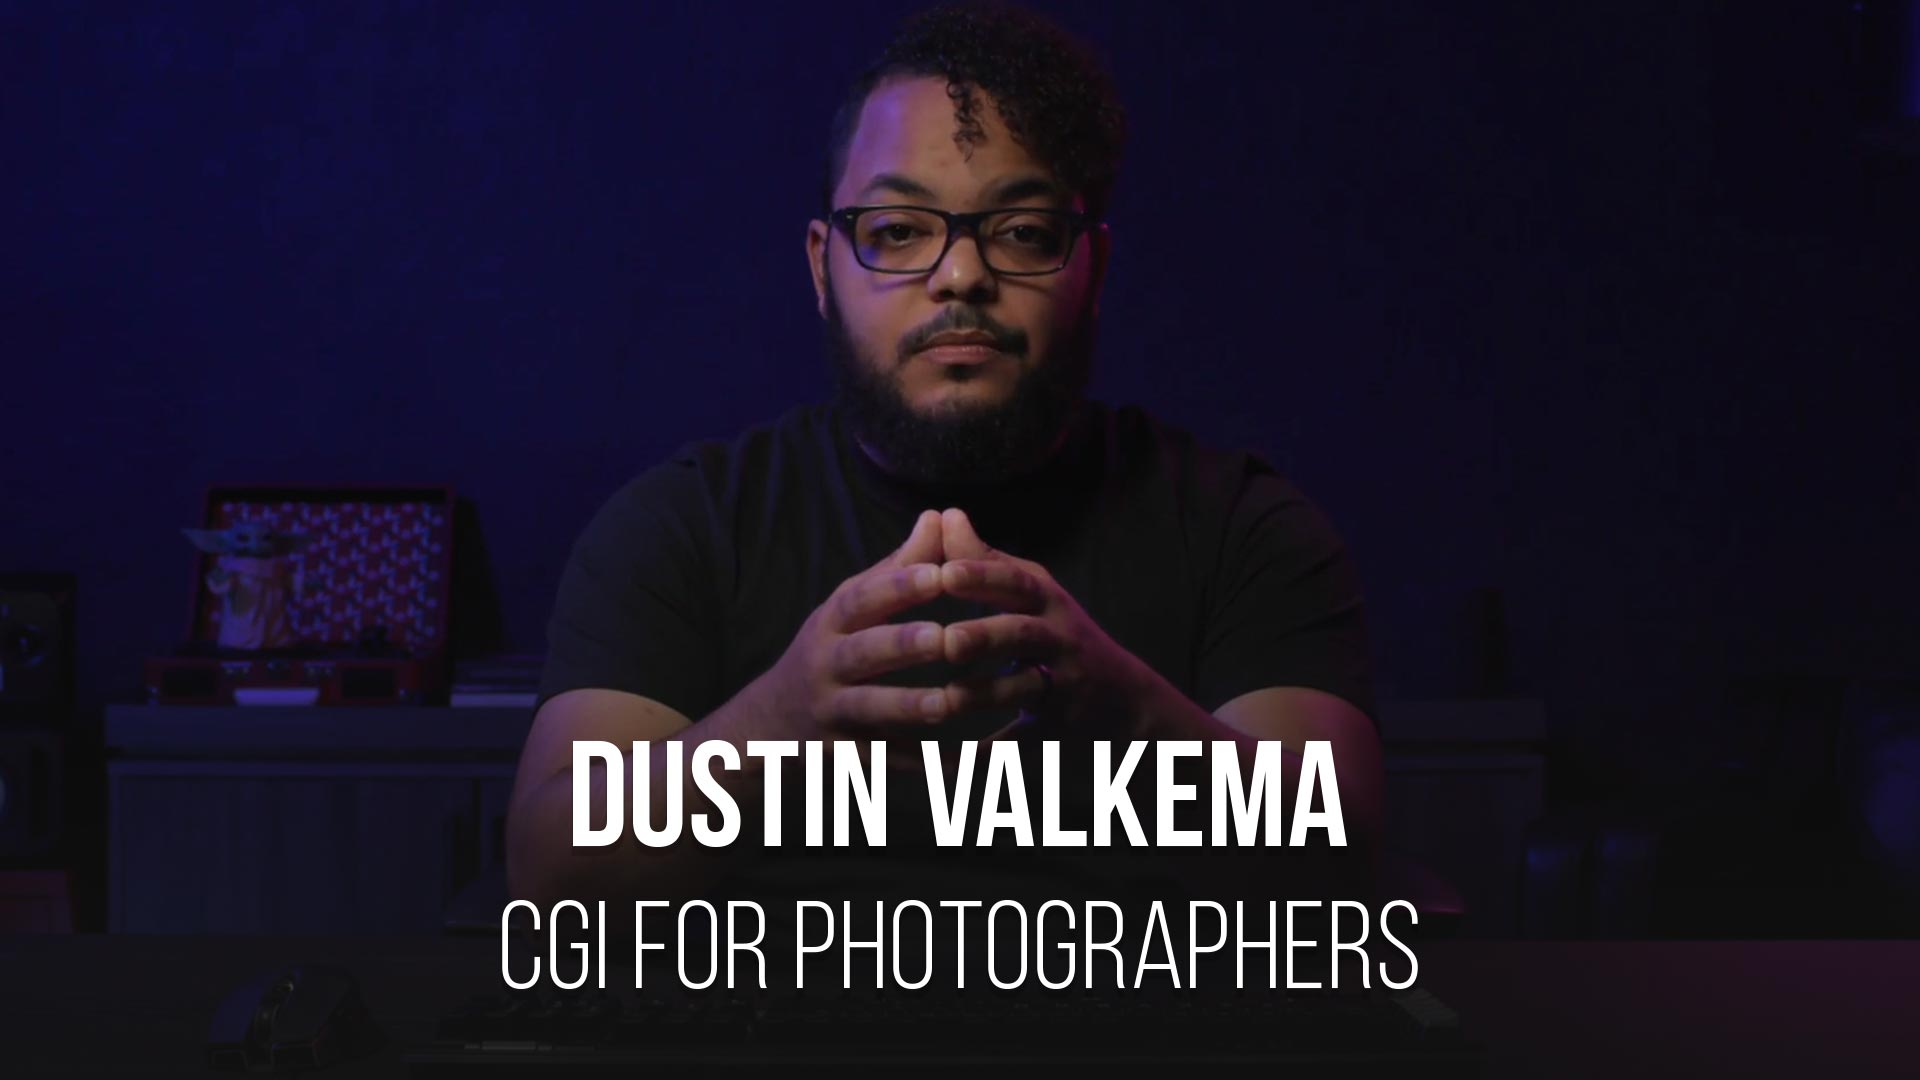 Dustin Valkema is a Cinema 4D Master, a professional retoucher in Adobe Photoshop and a professional photographer. He is a PRO EDU instructor and will introduce you to CGI and how it can elevate your photography.